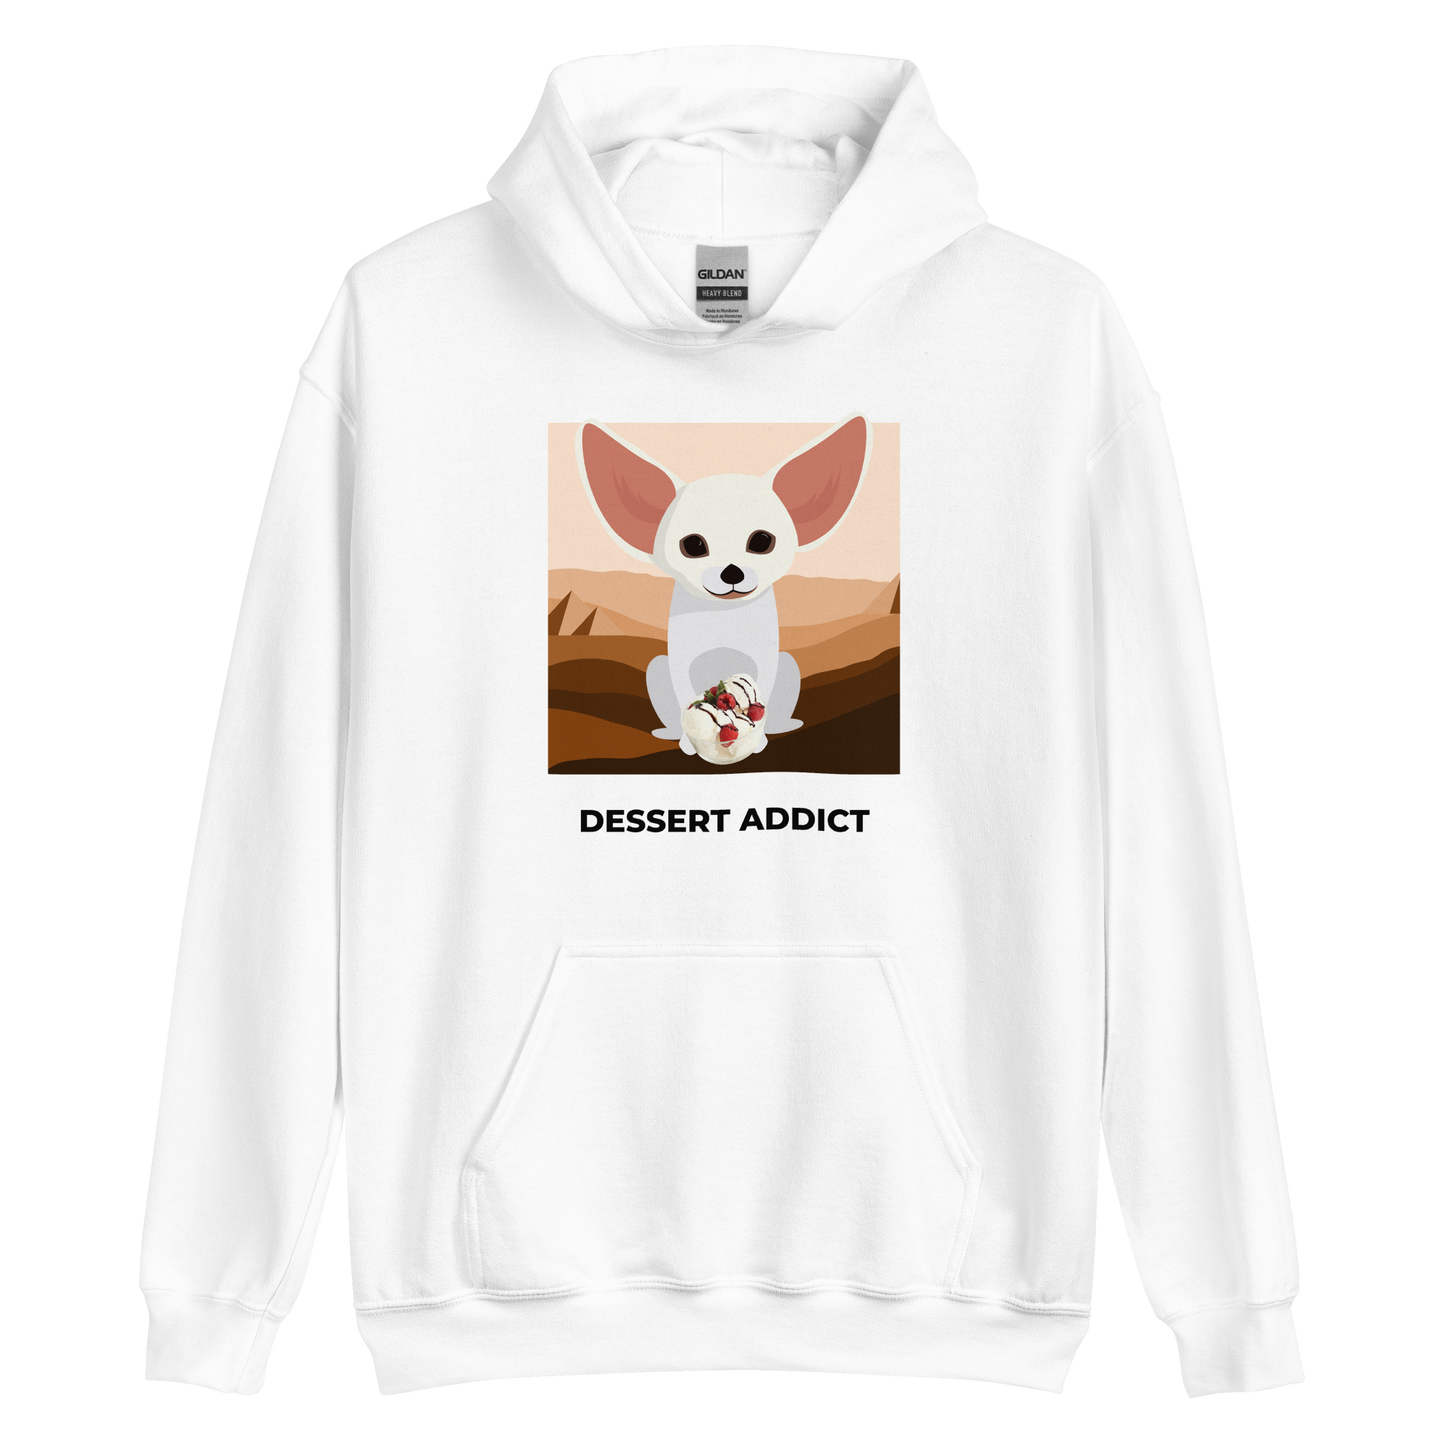 White Fennec Fox Hoodie featuring an adorable Dessert Addict graphic on the chest - Funny Graphic Fennec Fox Hoodies - Boozy Fox